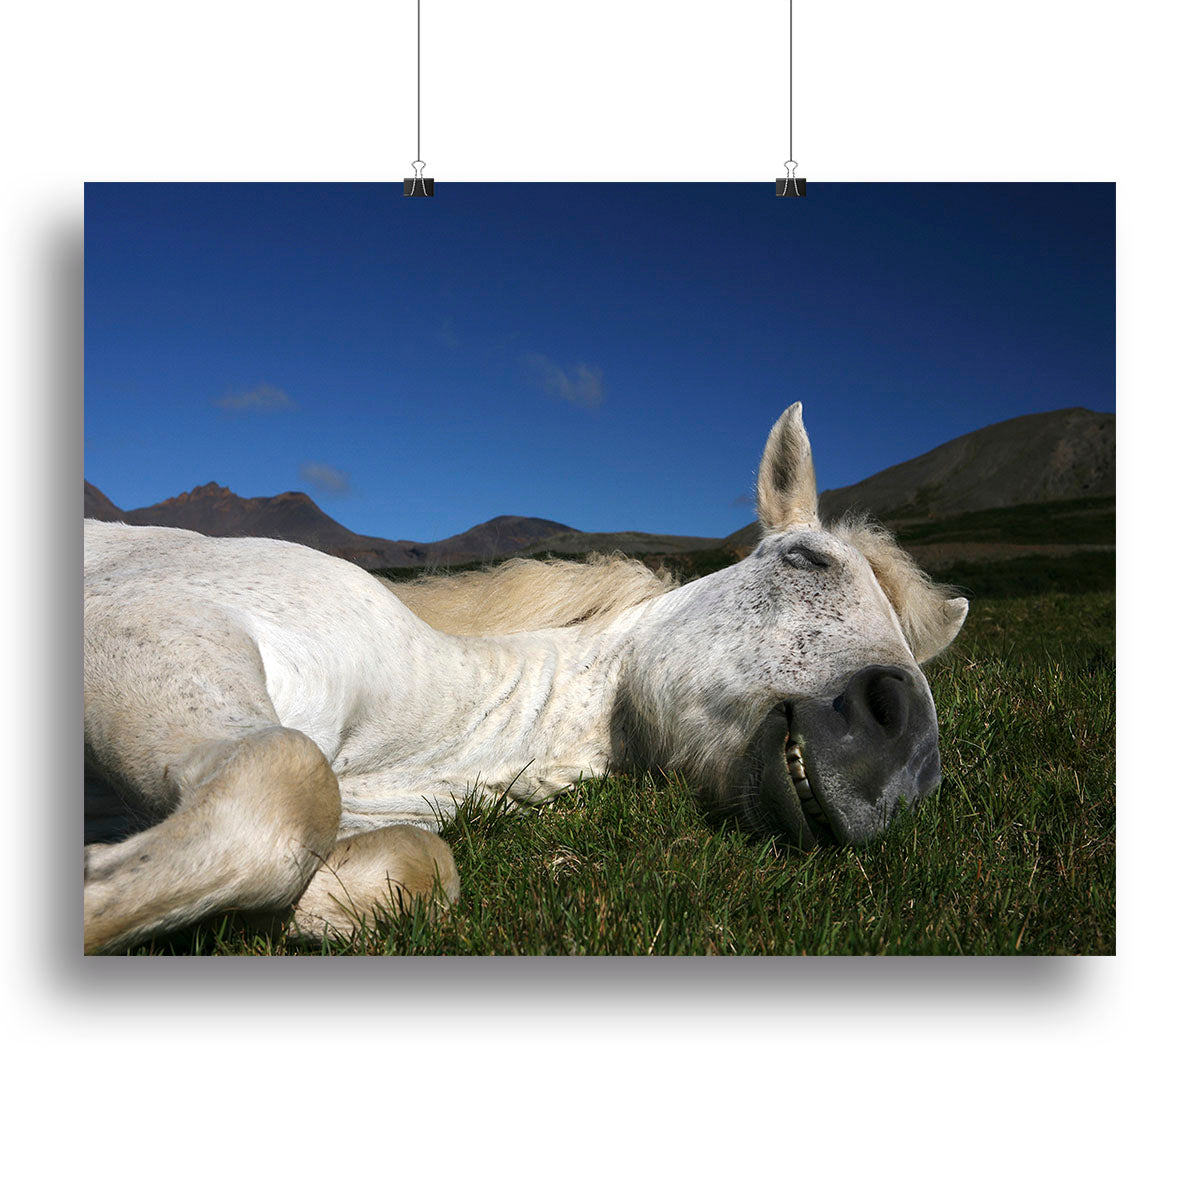 Sleeping Beauty Canvas Print or Poster - 1x - 2